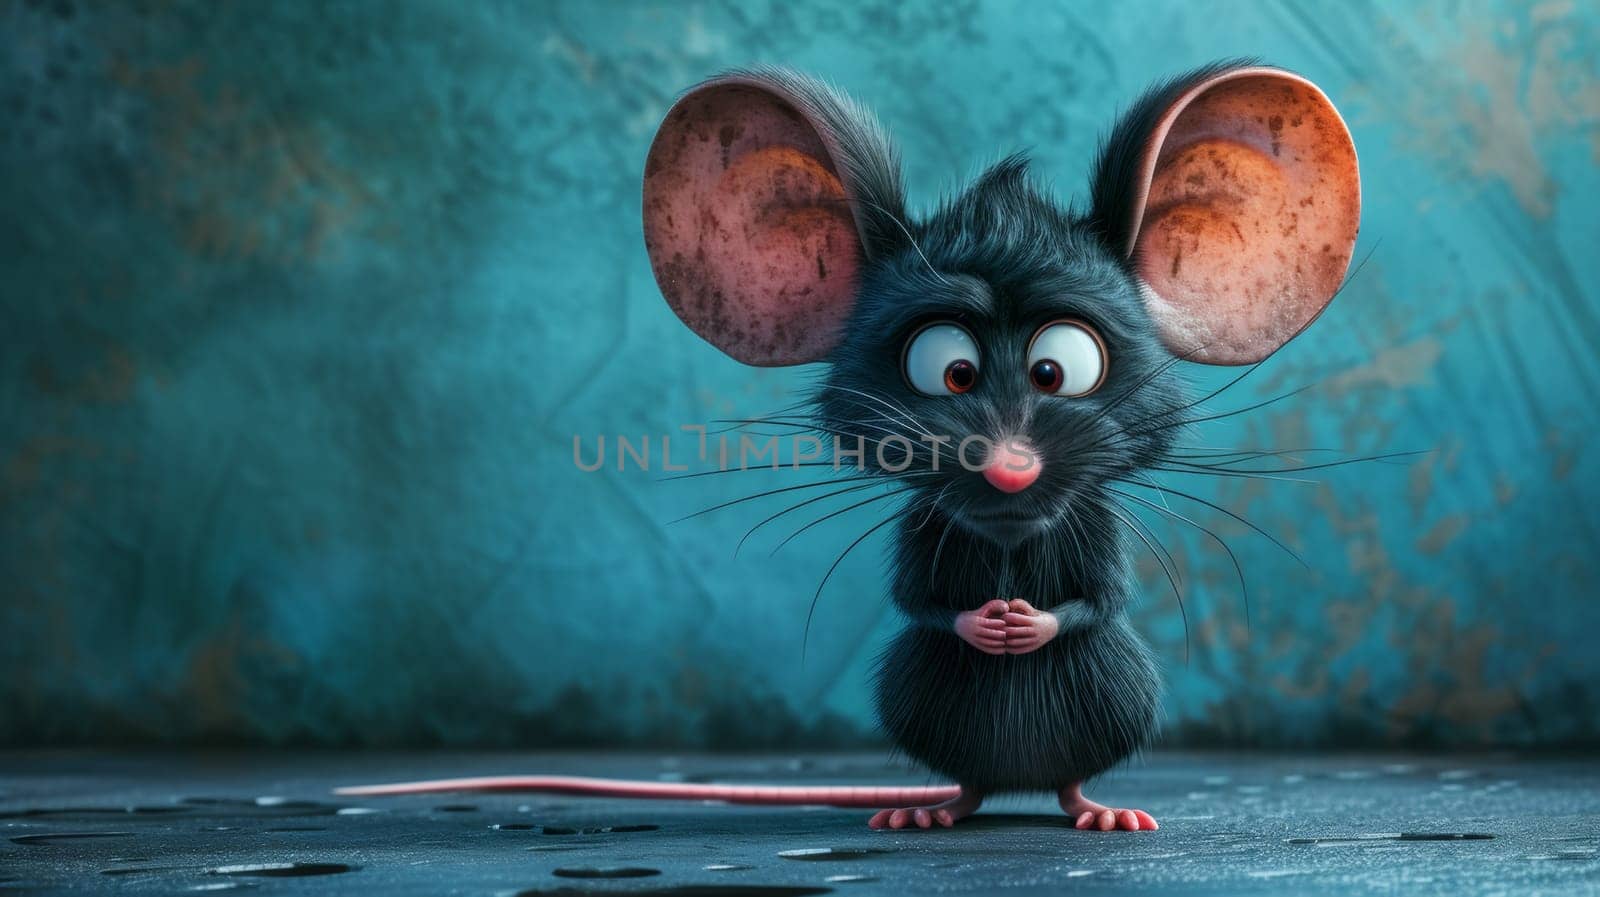 A cartoon mouse with big ears standing on a blue floor